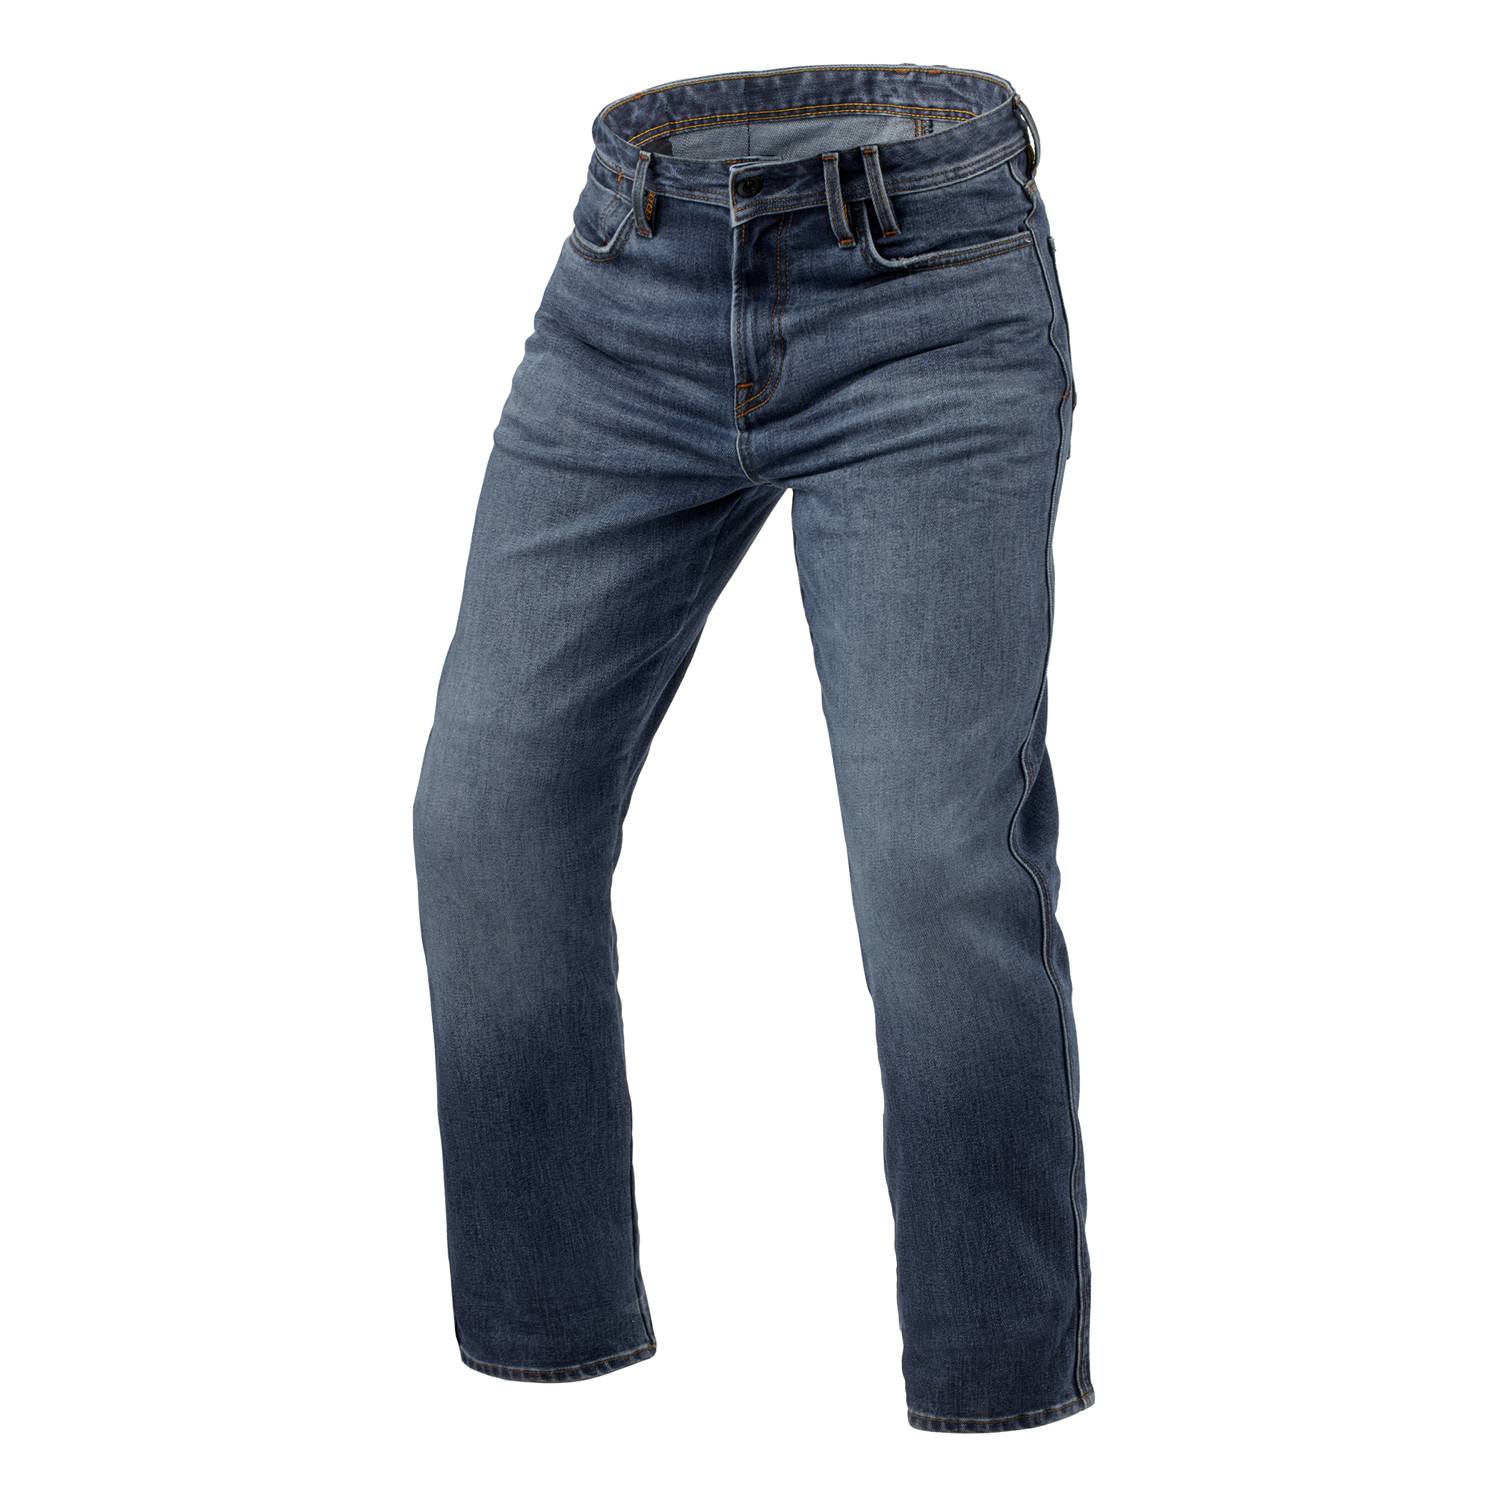 Image of REV'IT! Jeans Lombard 3 RF Mid Blue Stone L32 Motorcycle Jeans Taille L32/W32